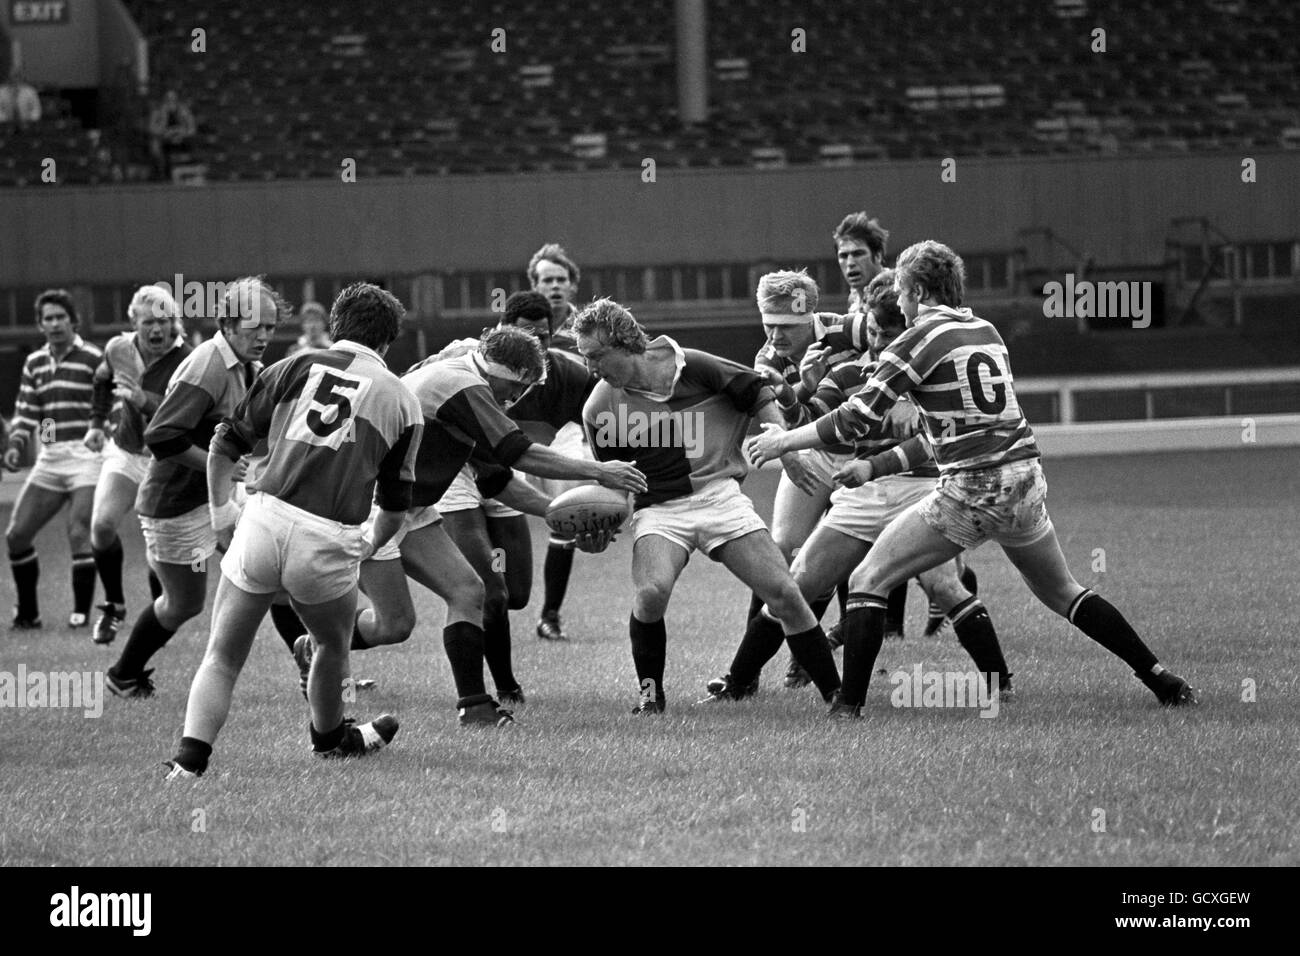 Rugby Union - Harlequins v Leicester Stock Photo